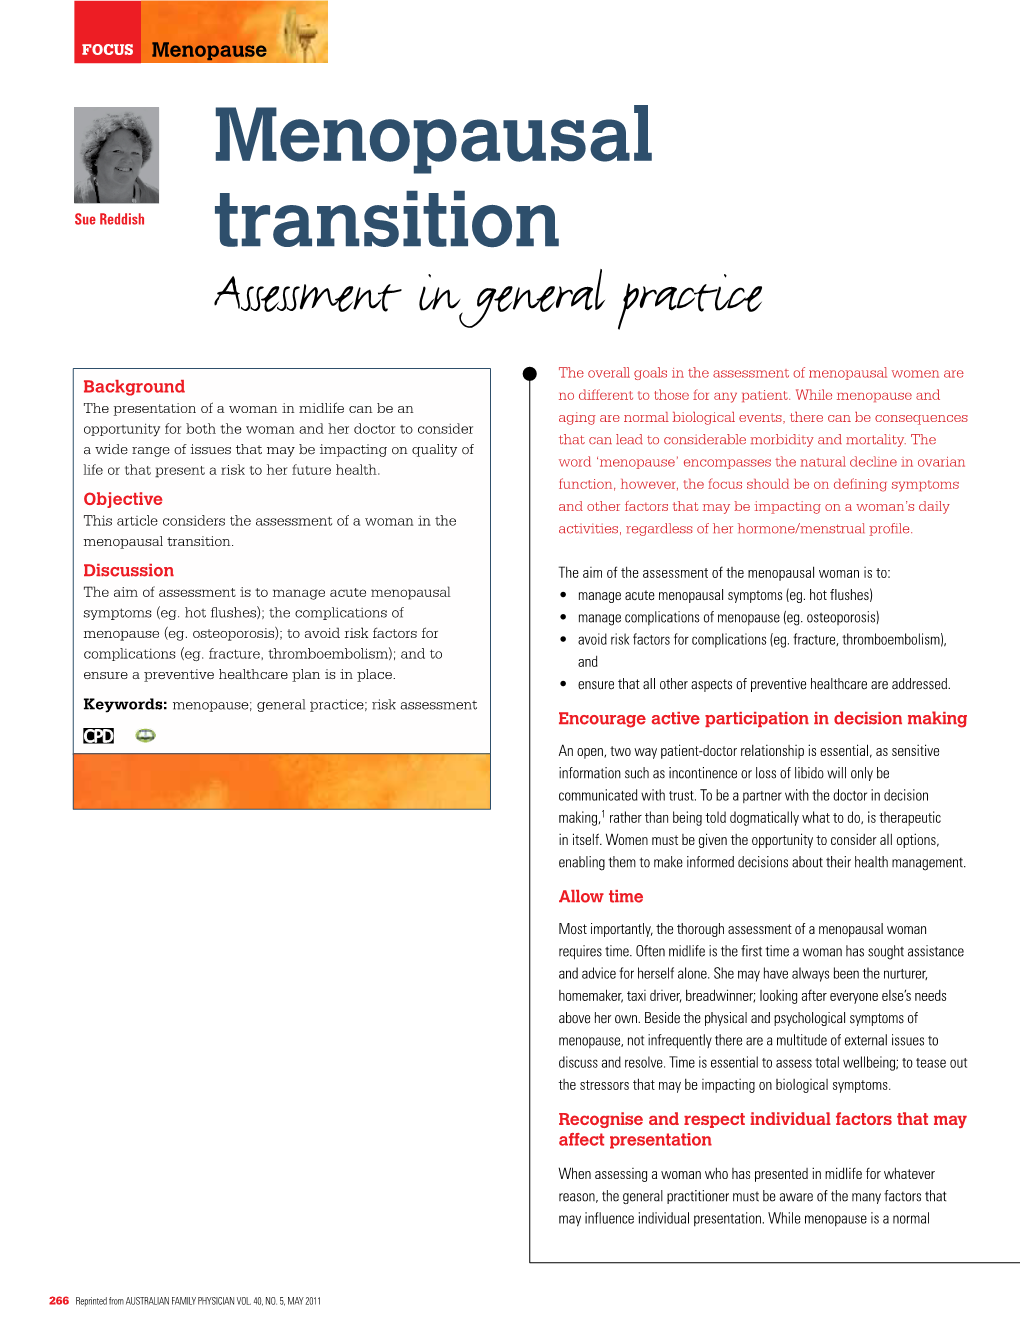 Menopausal Transition – Assessment in General Practice